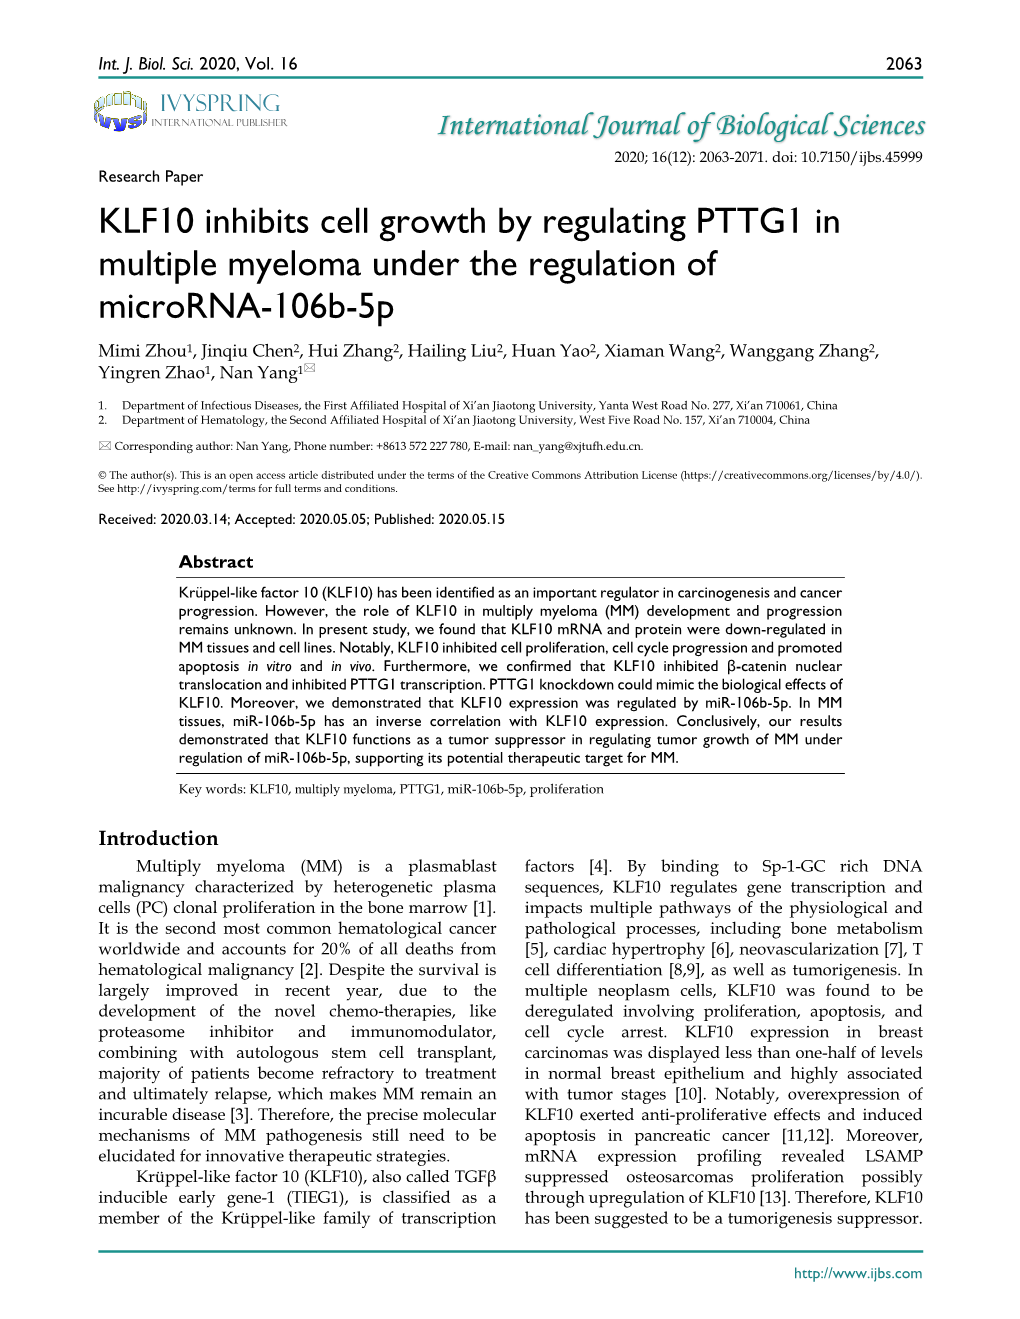 KLF10 Inhibits Cell Growth by Regulating PTTG1 in Multiple Myeloma Under the Regulation of Microrna-106B-5P